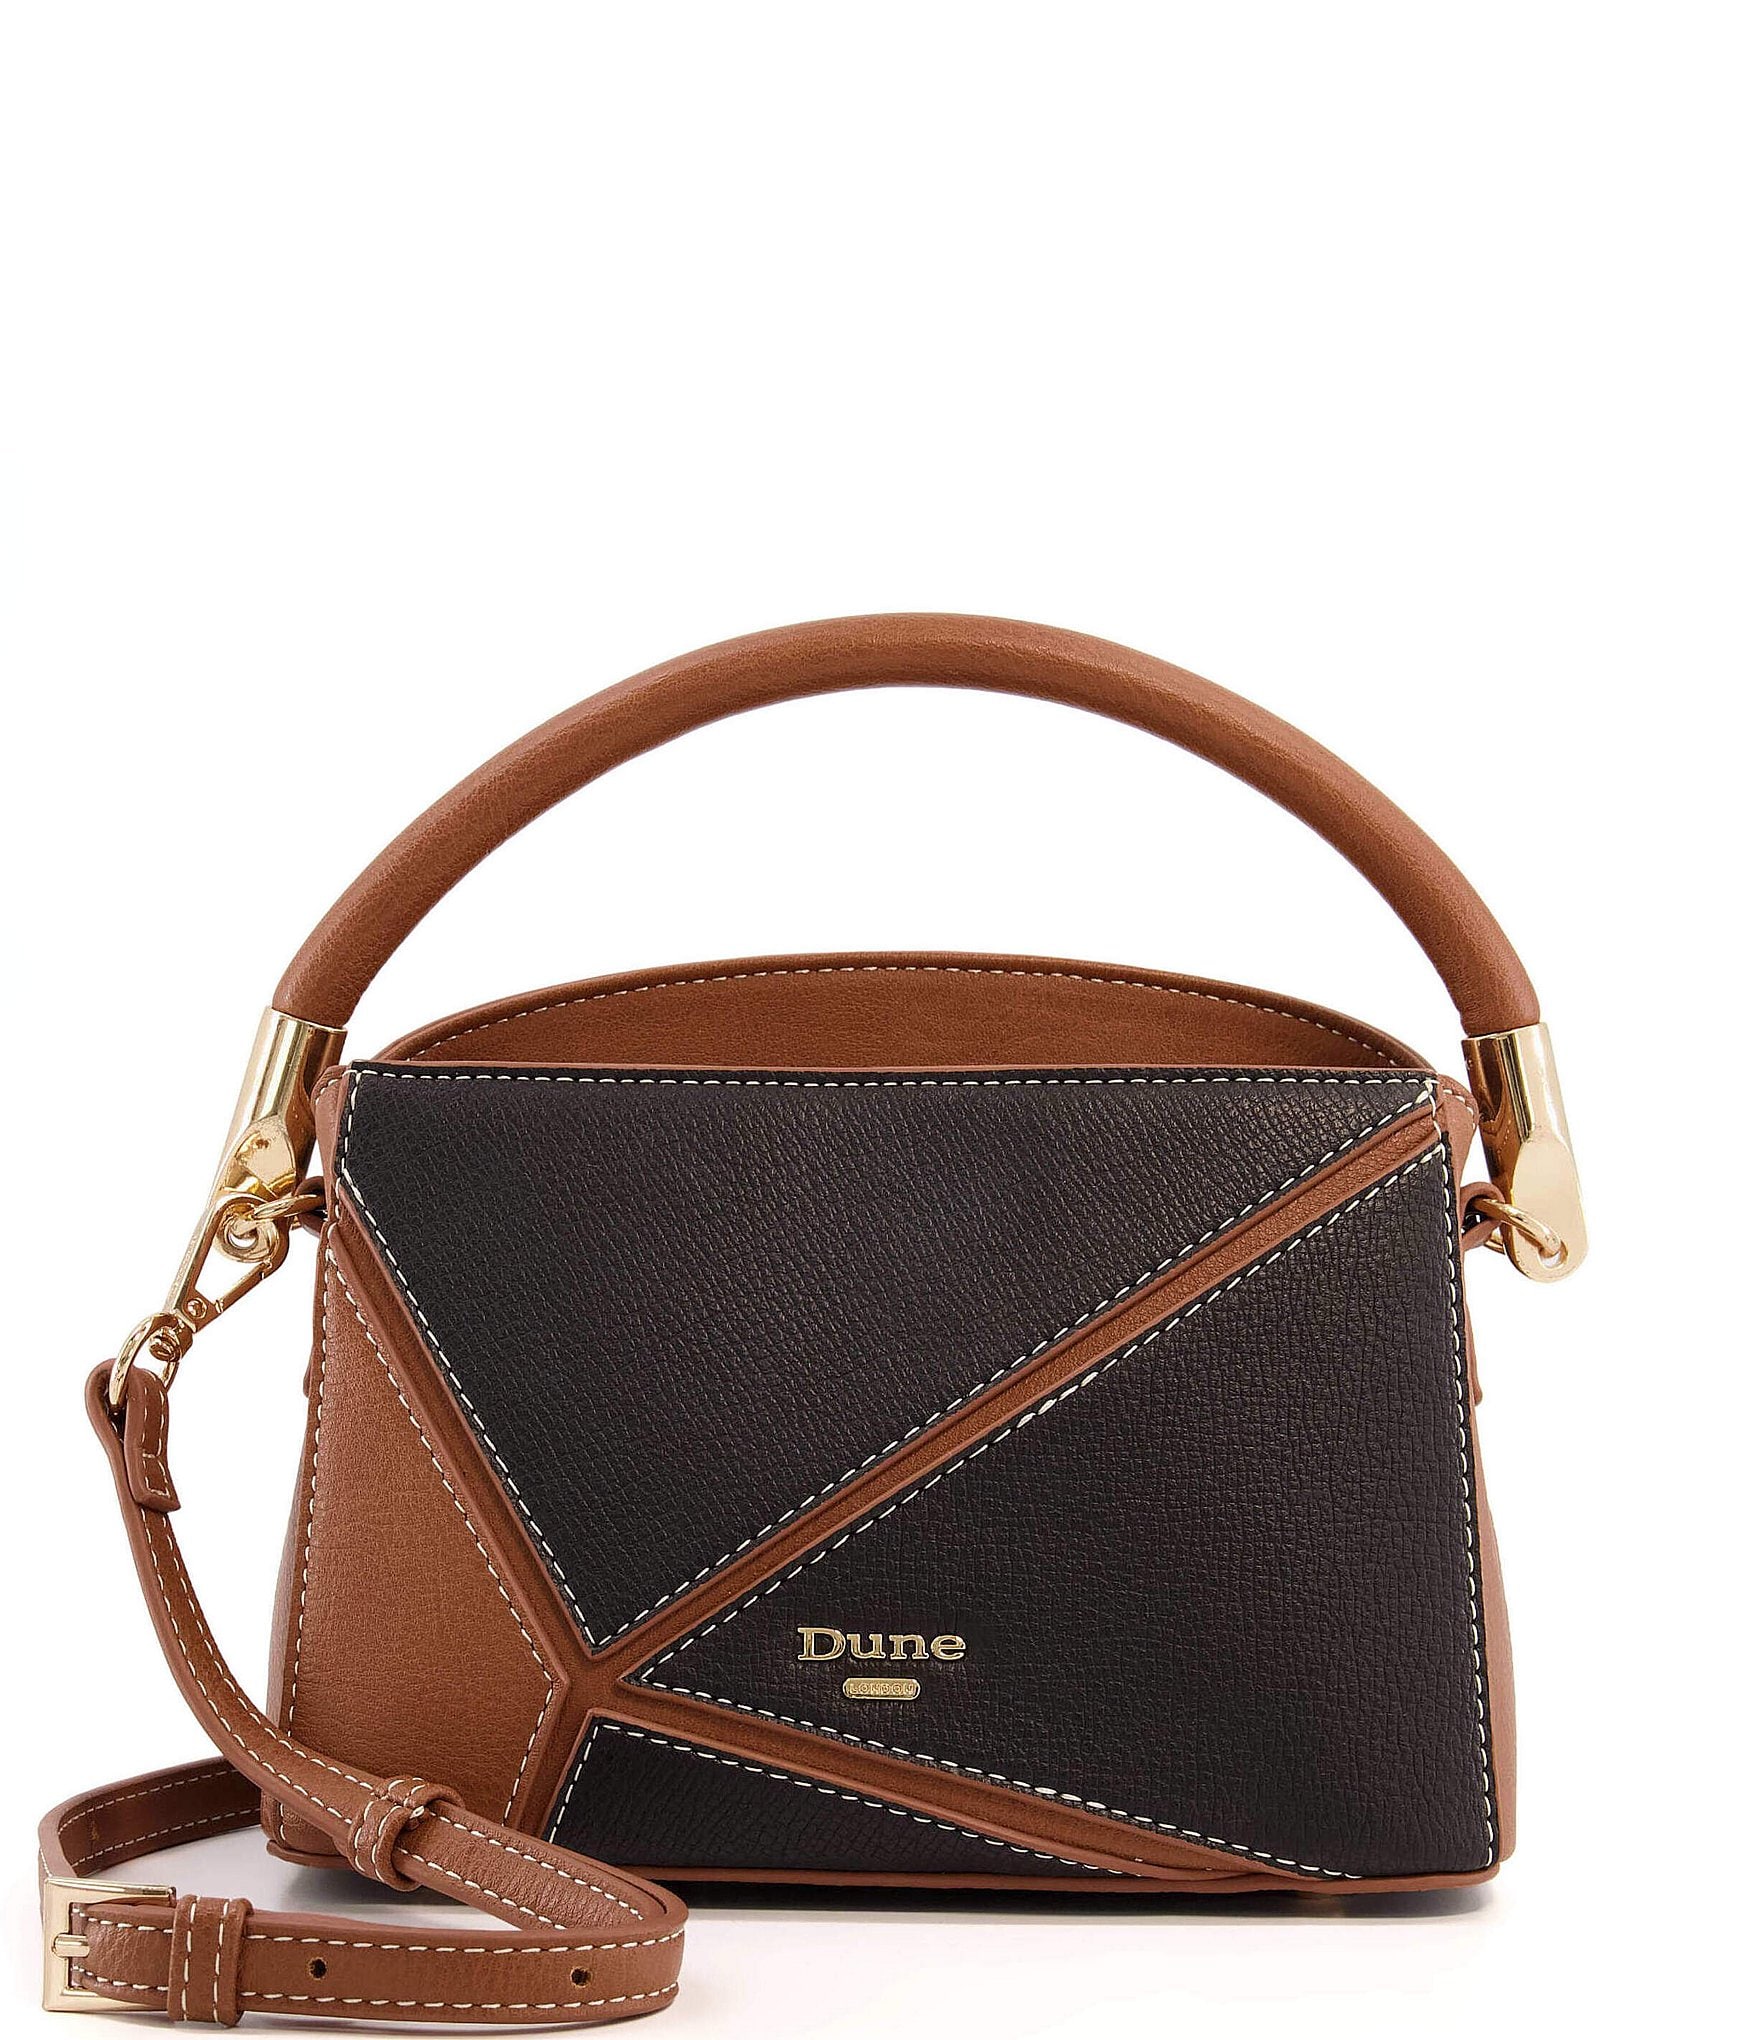 Ophidia Designer Leather Crescent Crossbody Bag With Chain Strap  Interlocking Round Design For Womens Luxury Purse, Handbag, And Crossbody  Use From Fashiondesignbags, $42.29 | DHgate.Com